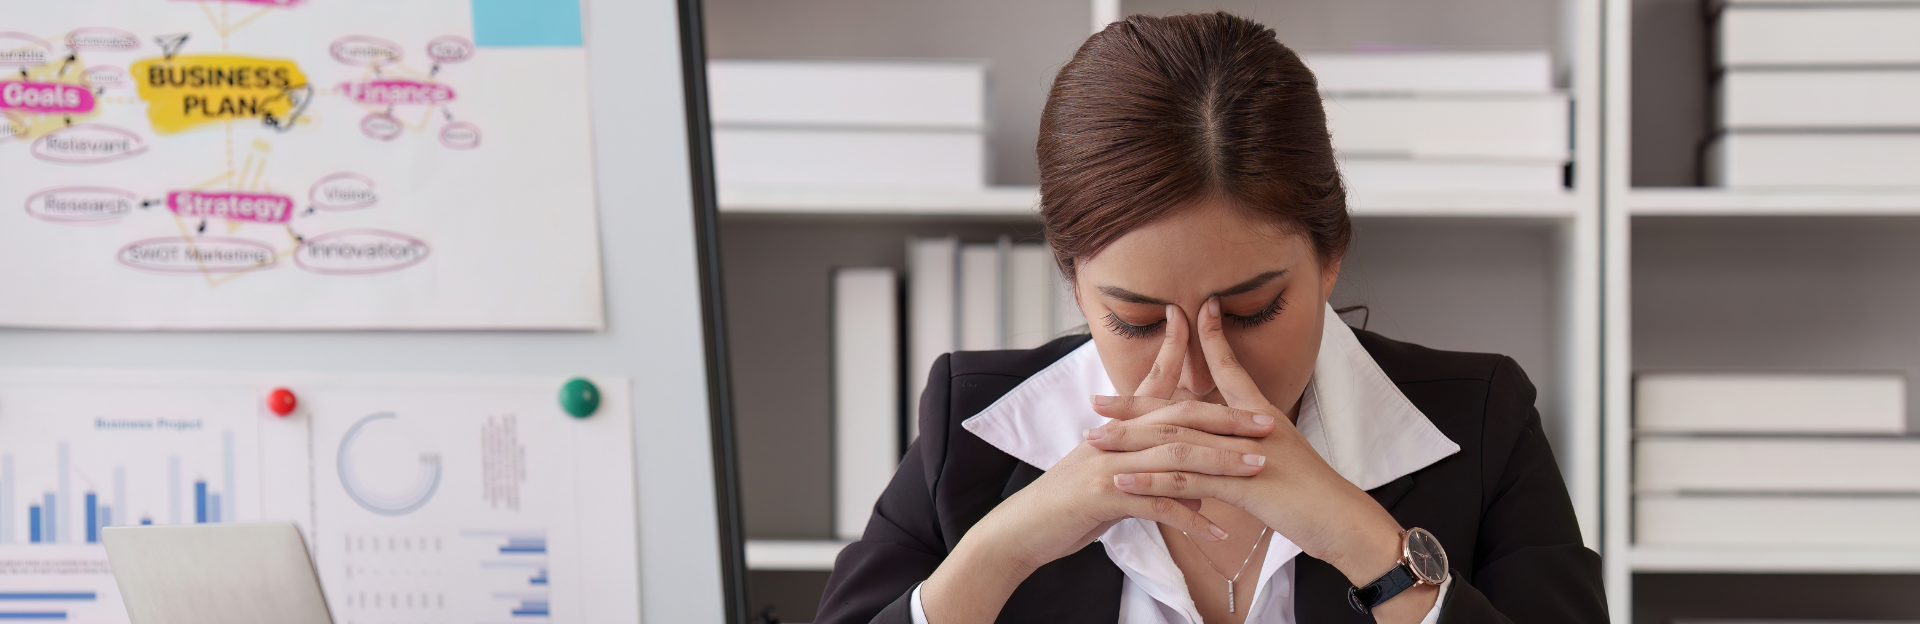 Latin woman in a business suit sitting down with hands on face looking stressed.